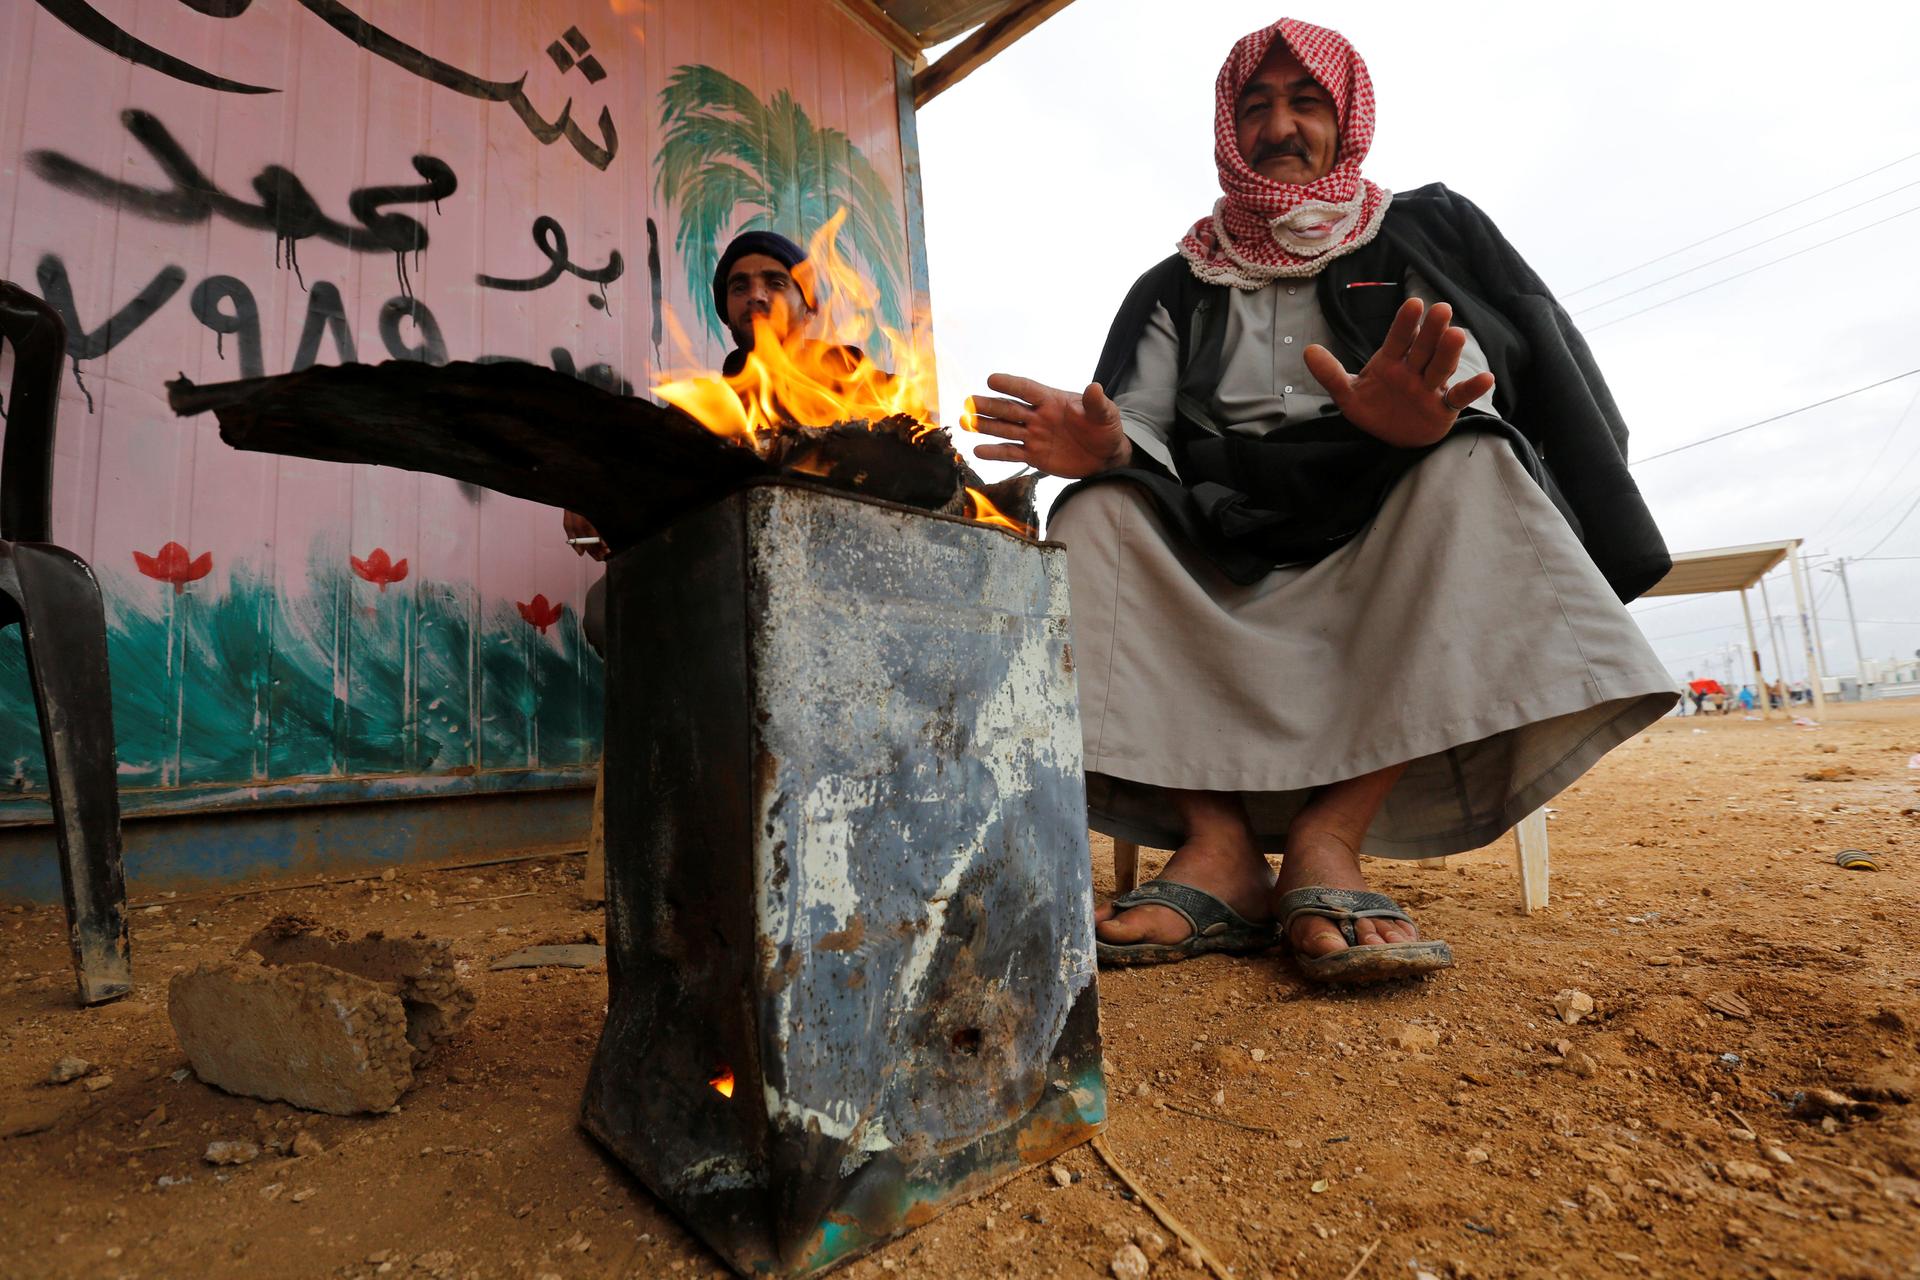 A Syrian refugee man sits by a fire at the Zaatari refugee camp in the Jordanian city of Mafraq, near the border with Syria, Dec. 18, 2016.